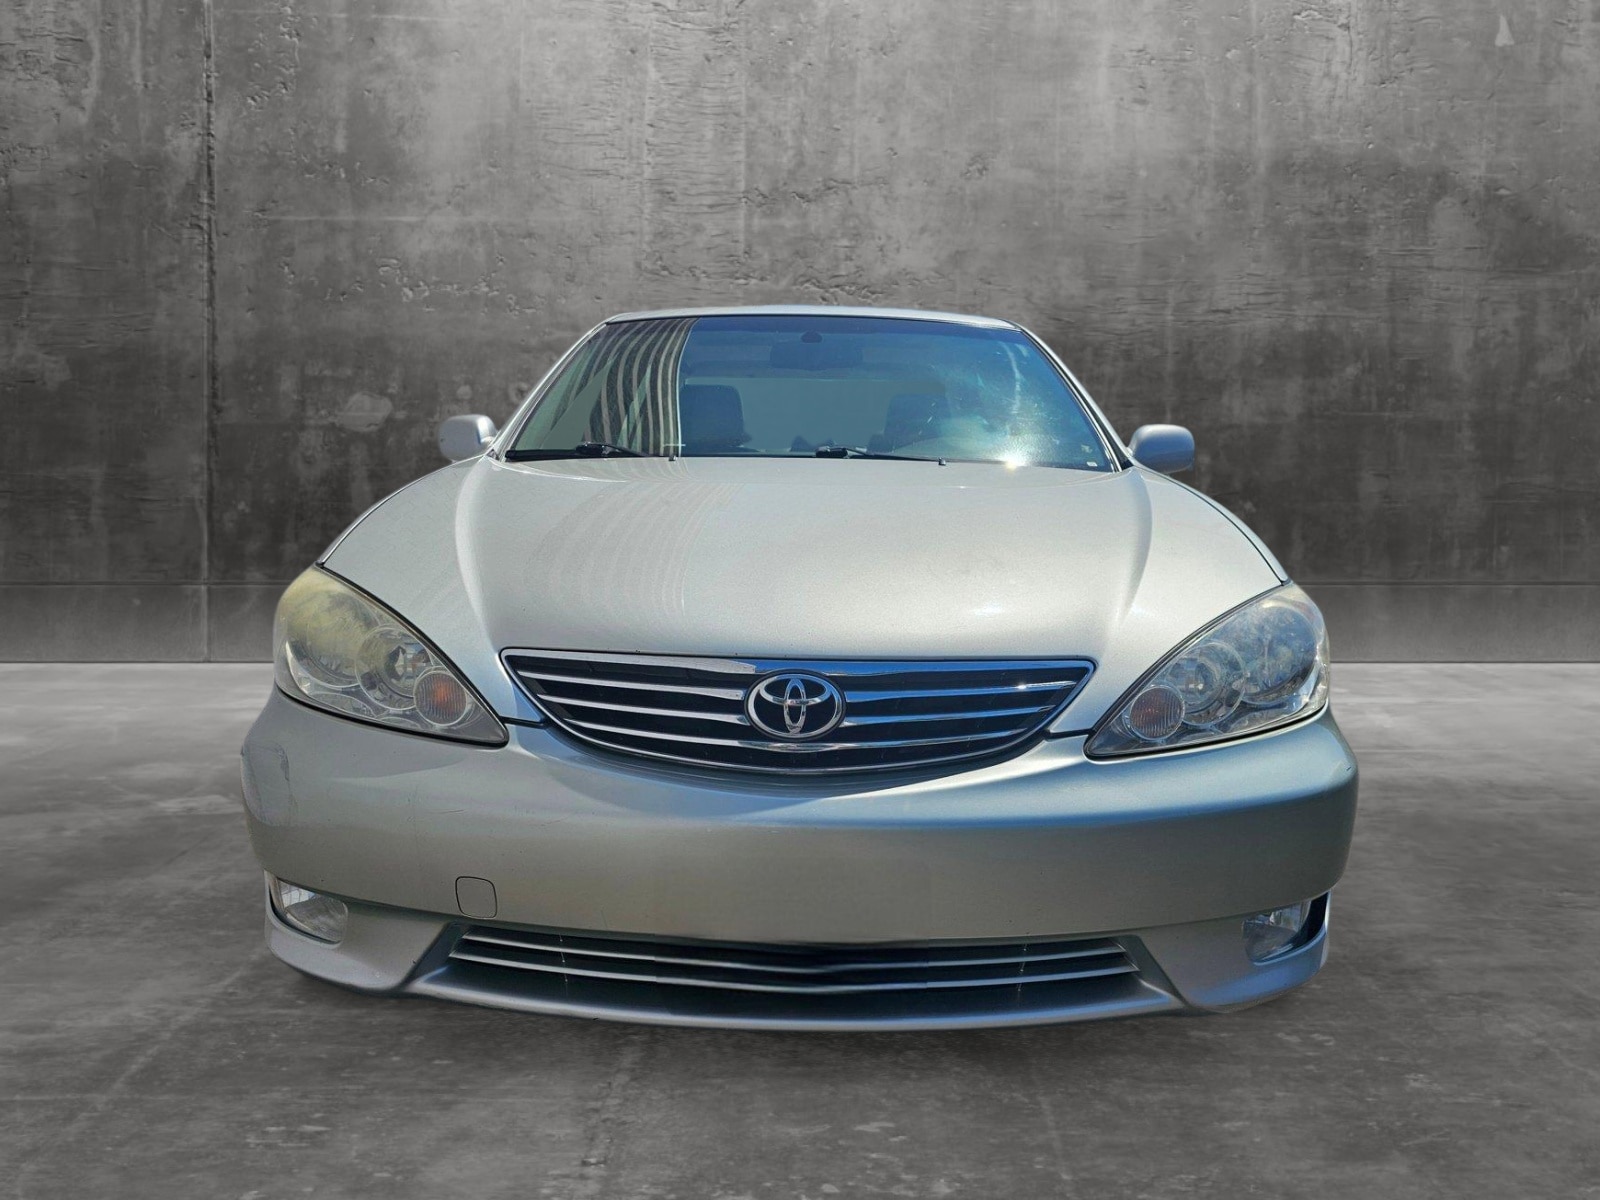 Used 2006 Toyota Camry XLE with VIN JTDBF30K760170567 for sale in Renton, WA